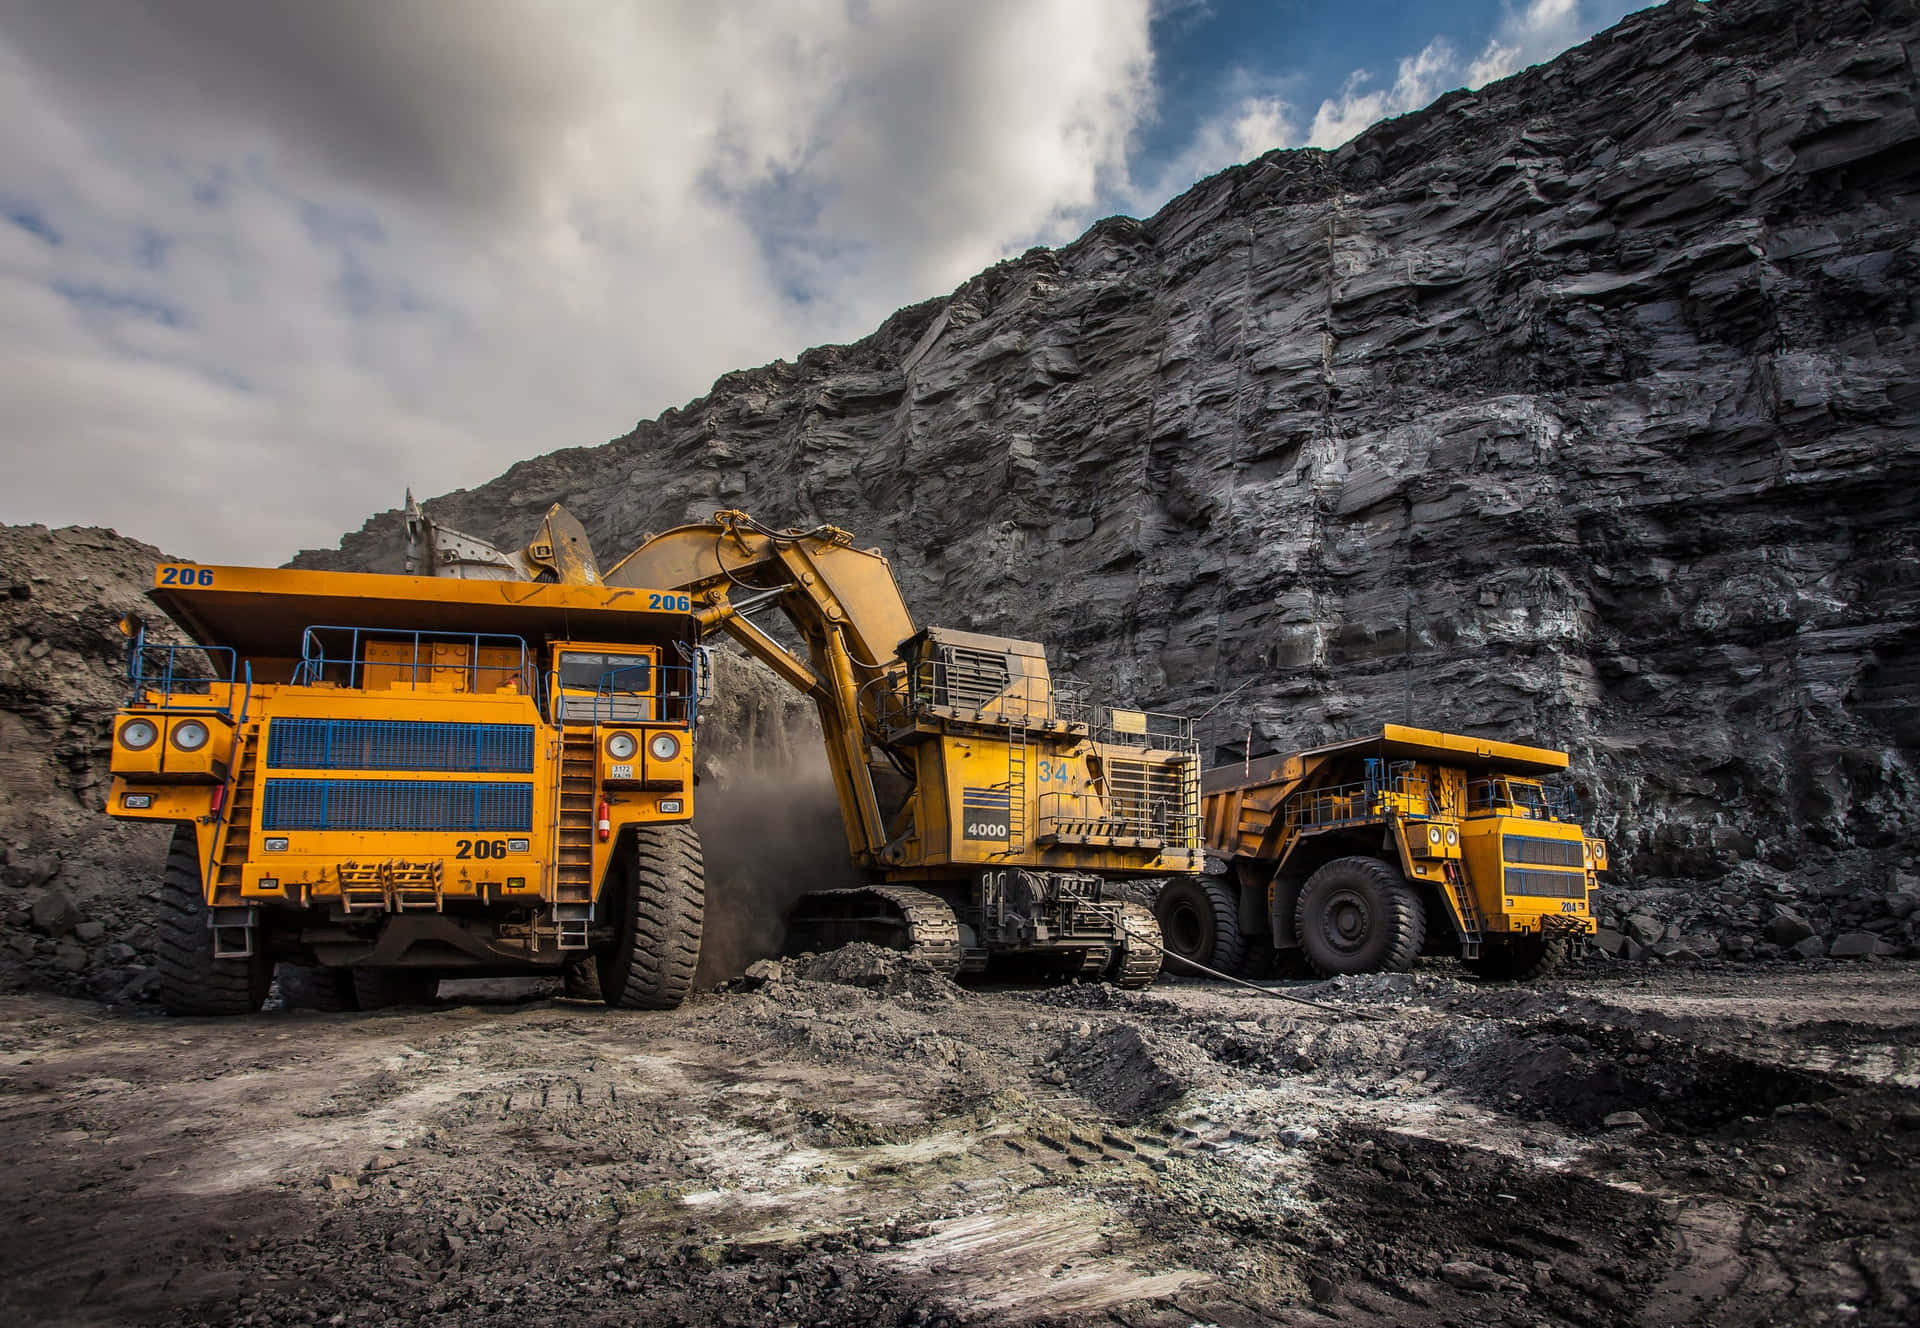 Two Large Trucks Are Parked In A Coal Mine